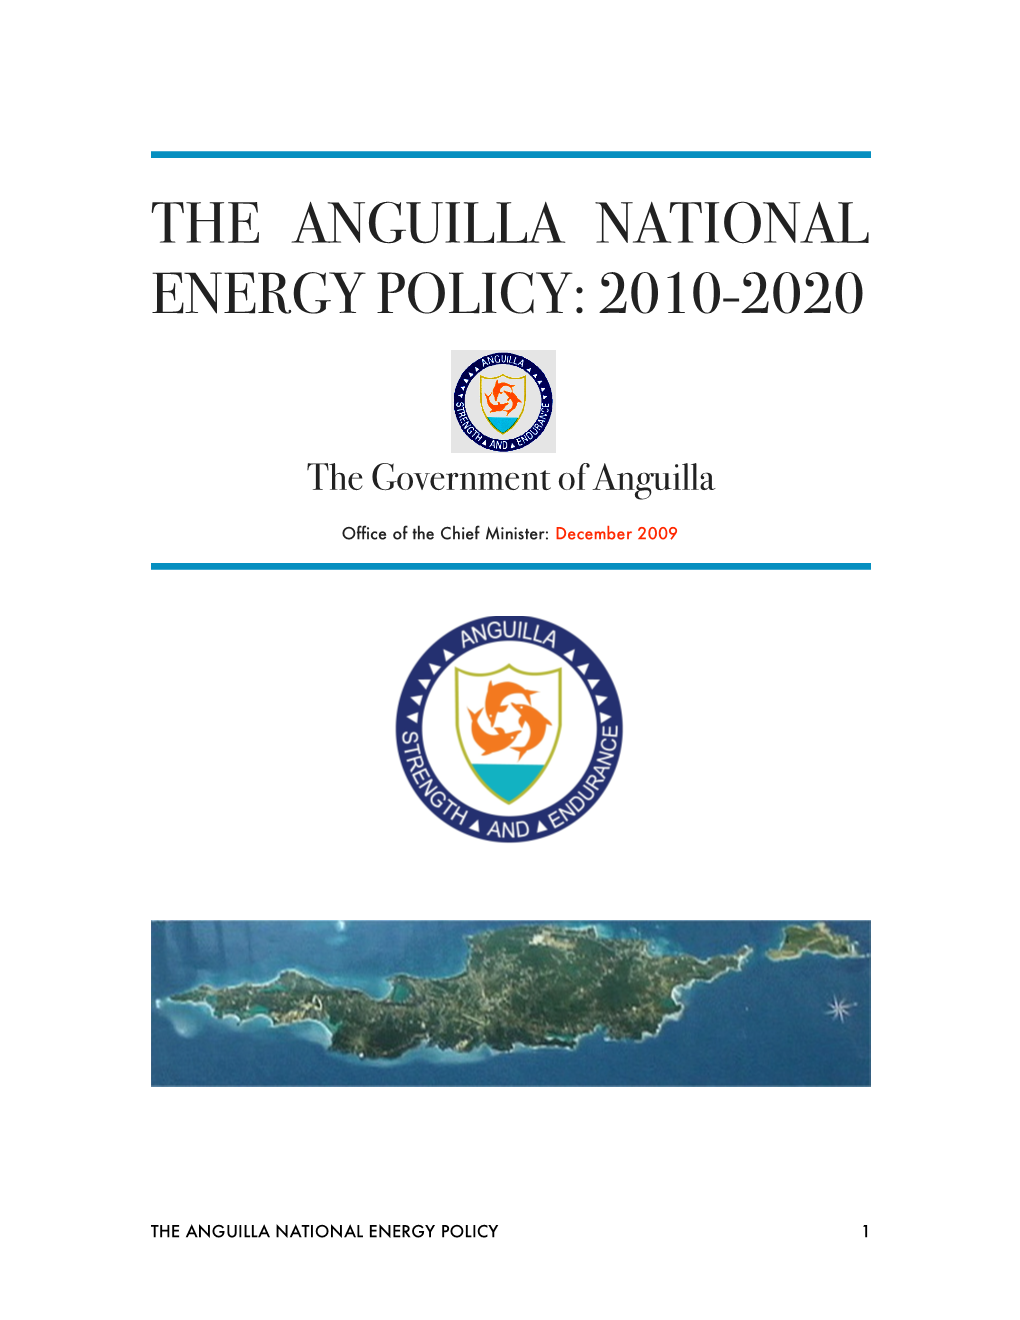 The Anguilla National Energy Policy: 2010-2020